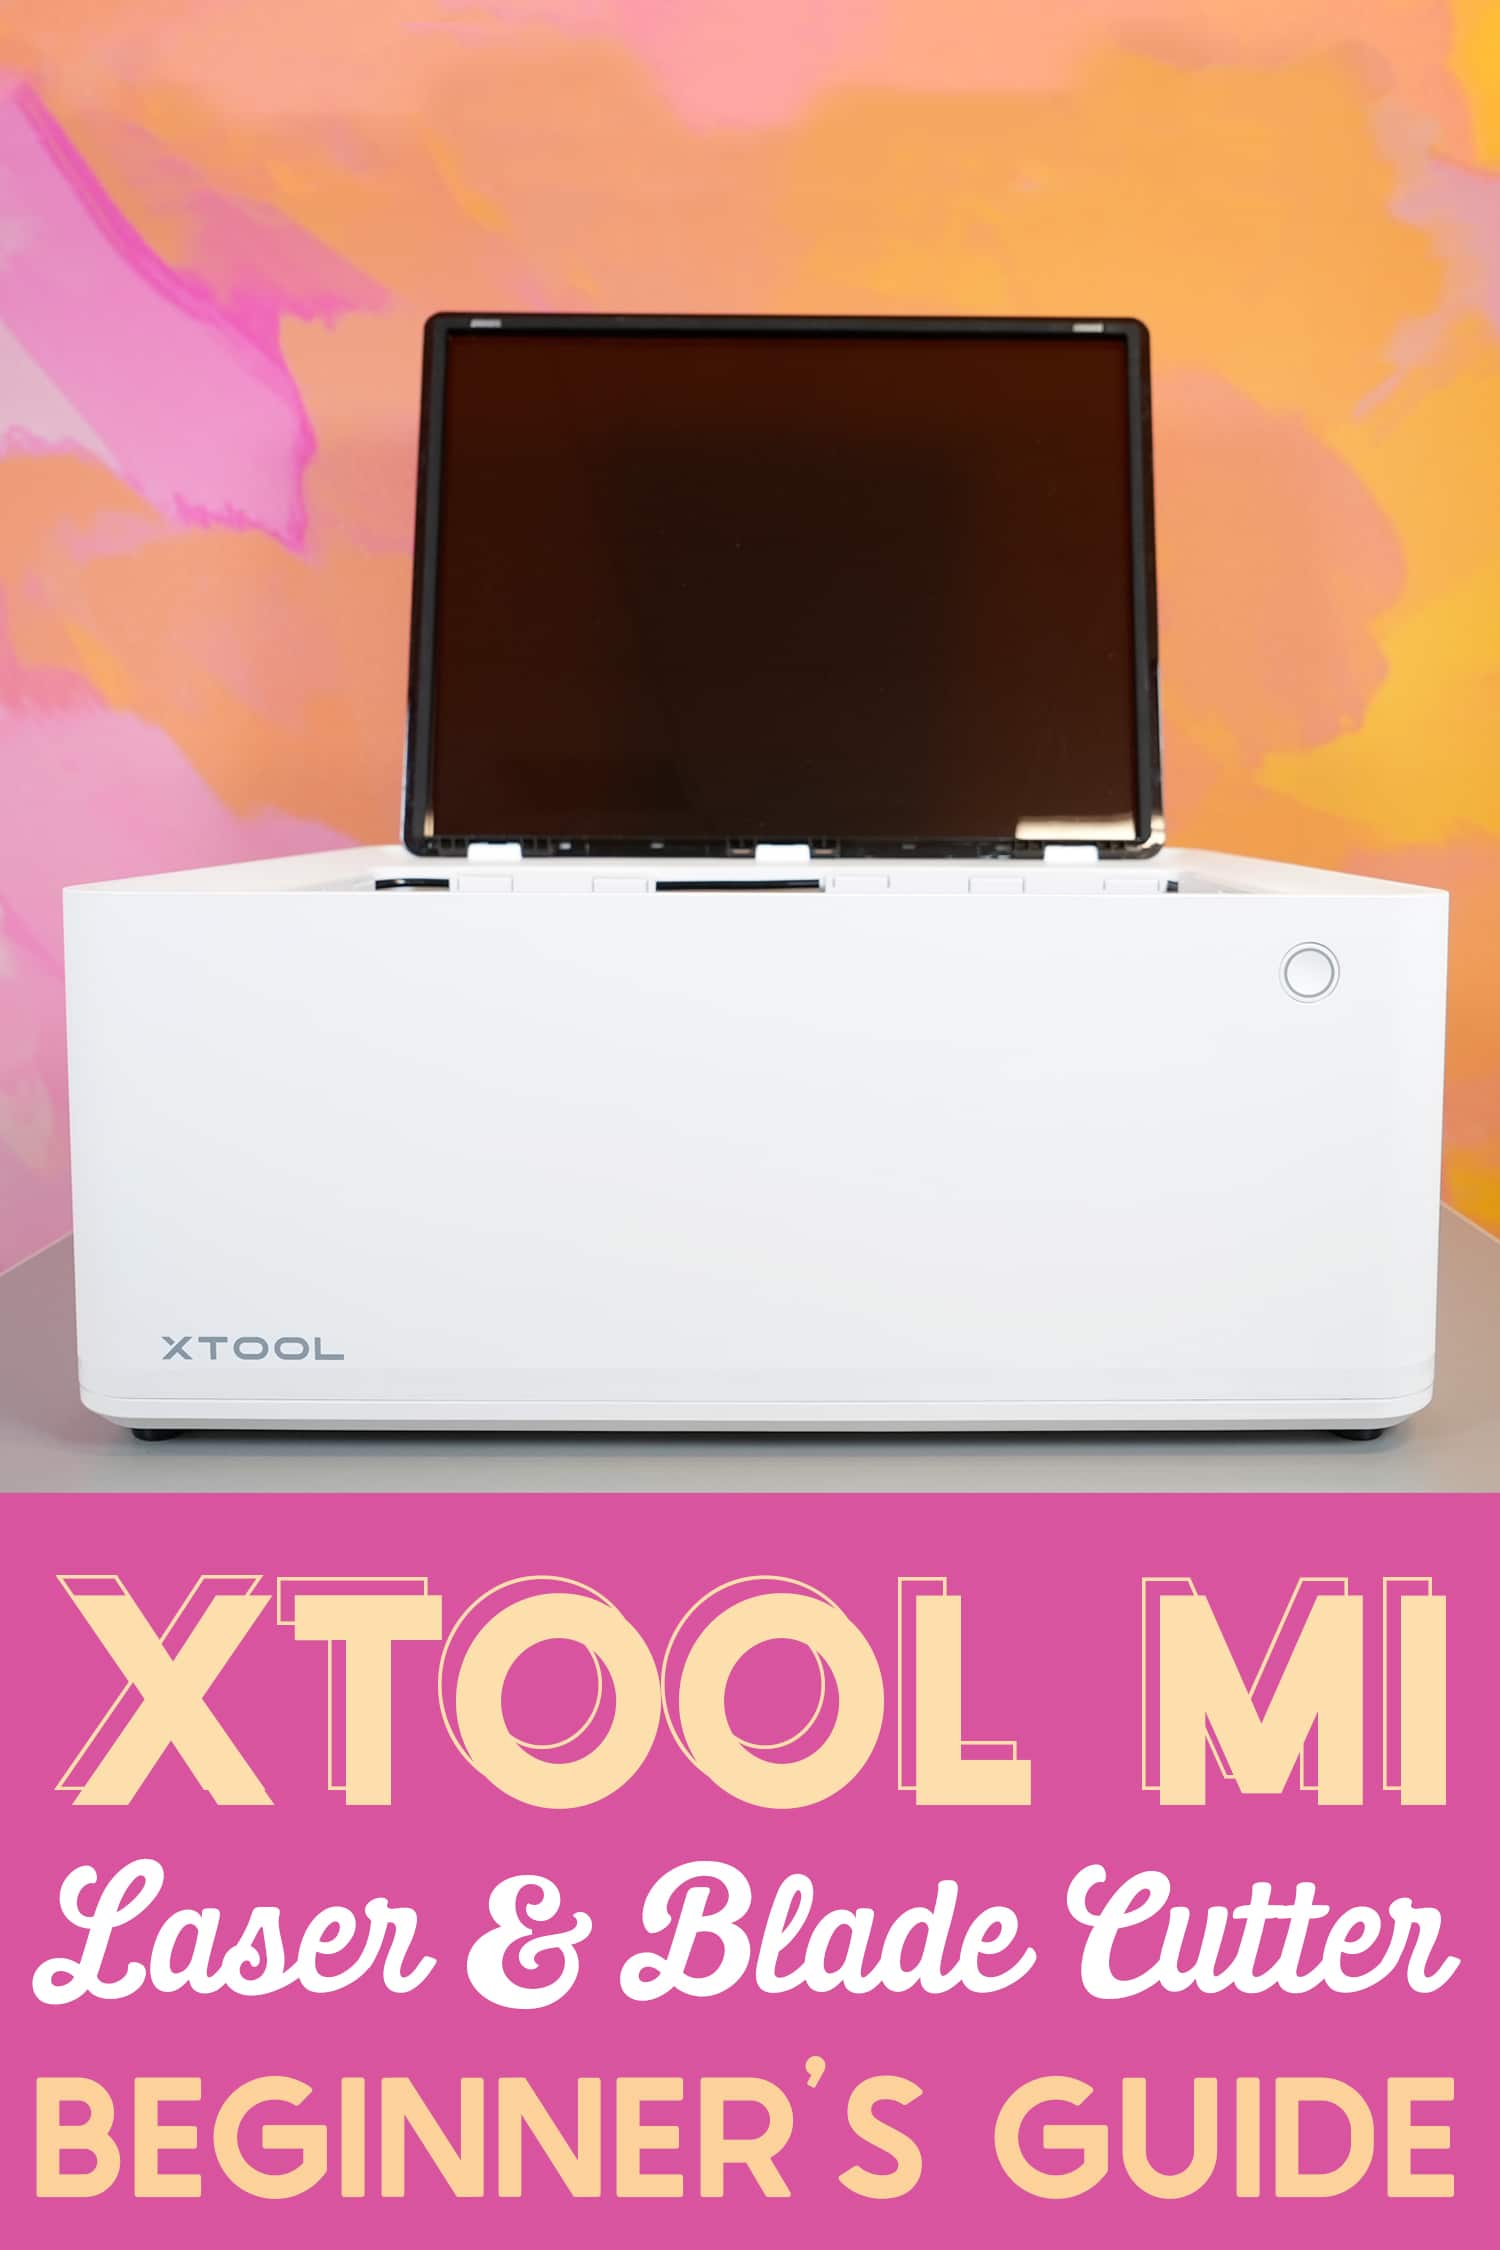 Beginners Guide to the xTool M1- How to Use xTool Creative Space - Keeping  it Simple